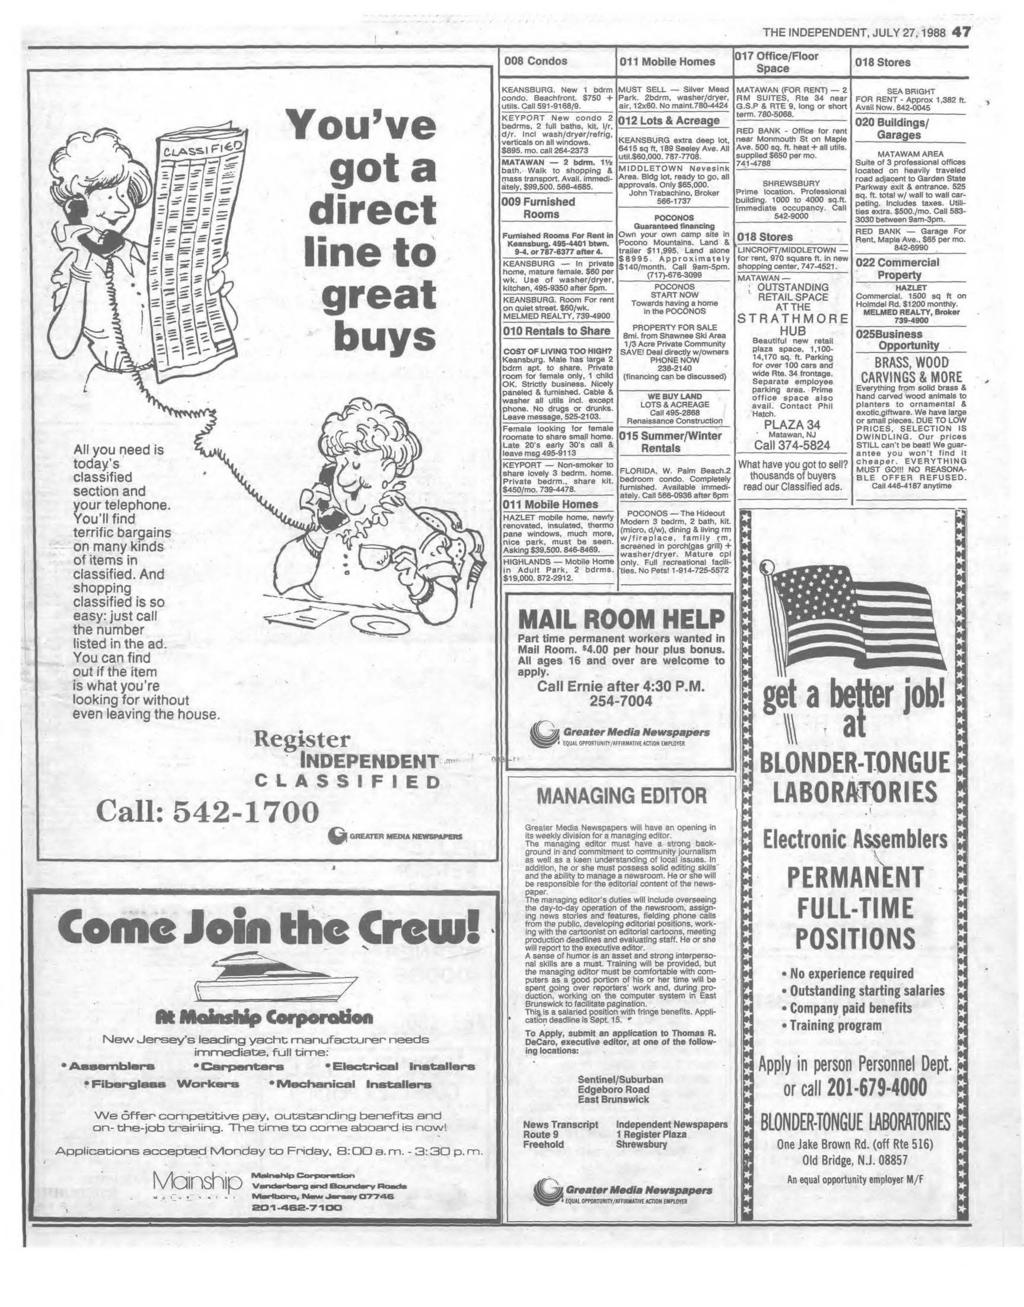 THE INDEPENDENT, JULY 27,1988 4 7 008 Condos 011 Mobile Homes 017 Office/Floor Space 018 Stores All you need is today s classified section and our telephone, ou ll find terrific bargains on many